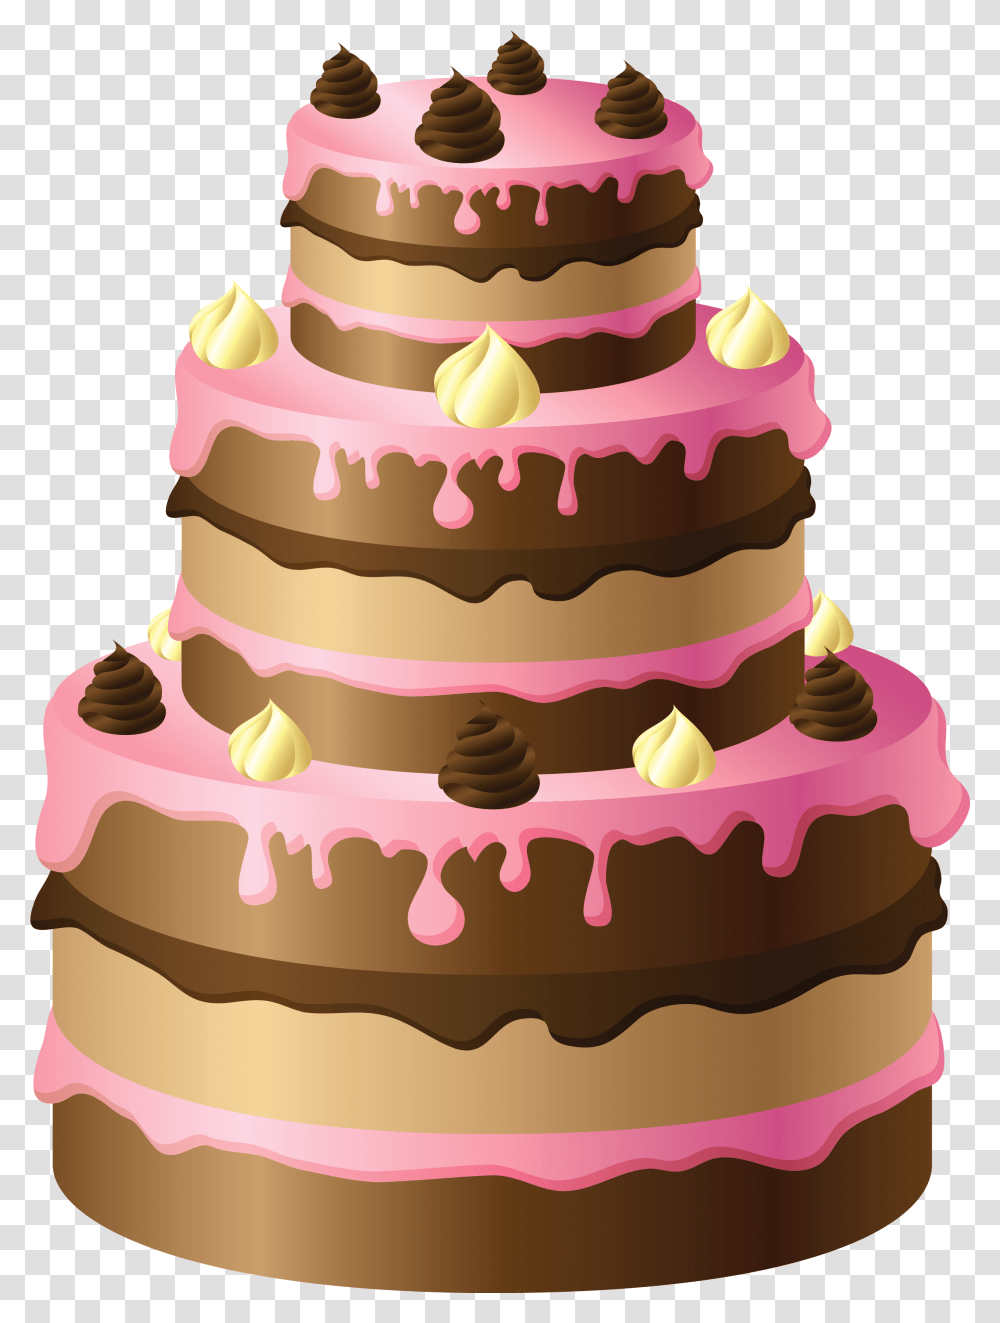 Happy Birthday Cake Images Clipart Cake With Background, Dessert, Food, Wedding Cake, Sweets Transparent Png